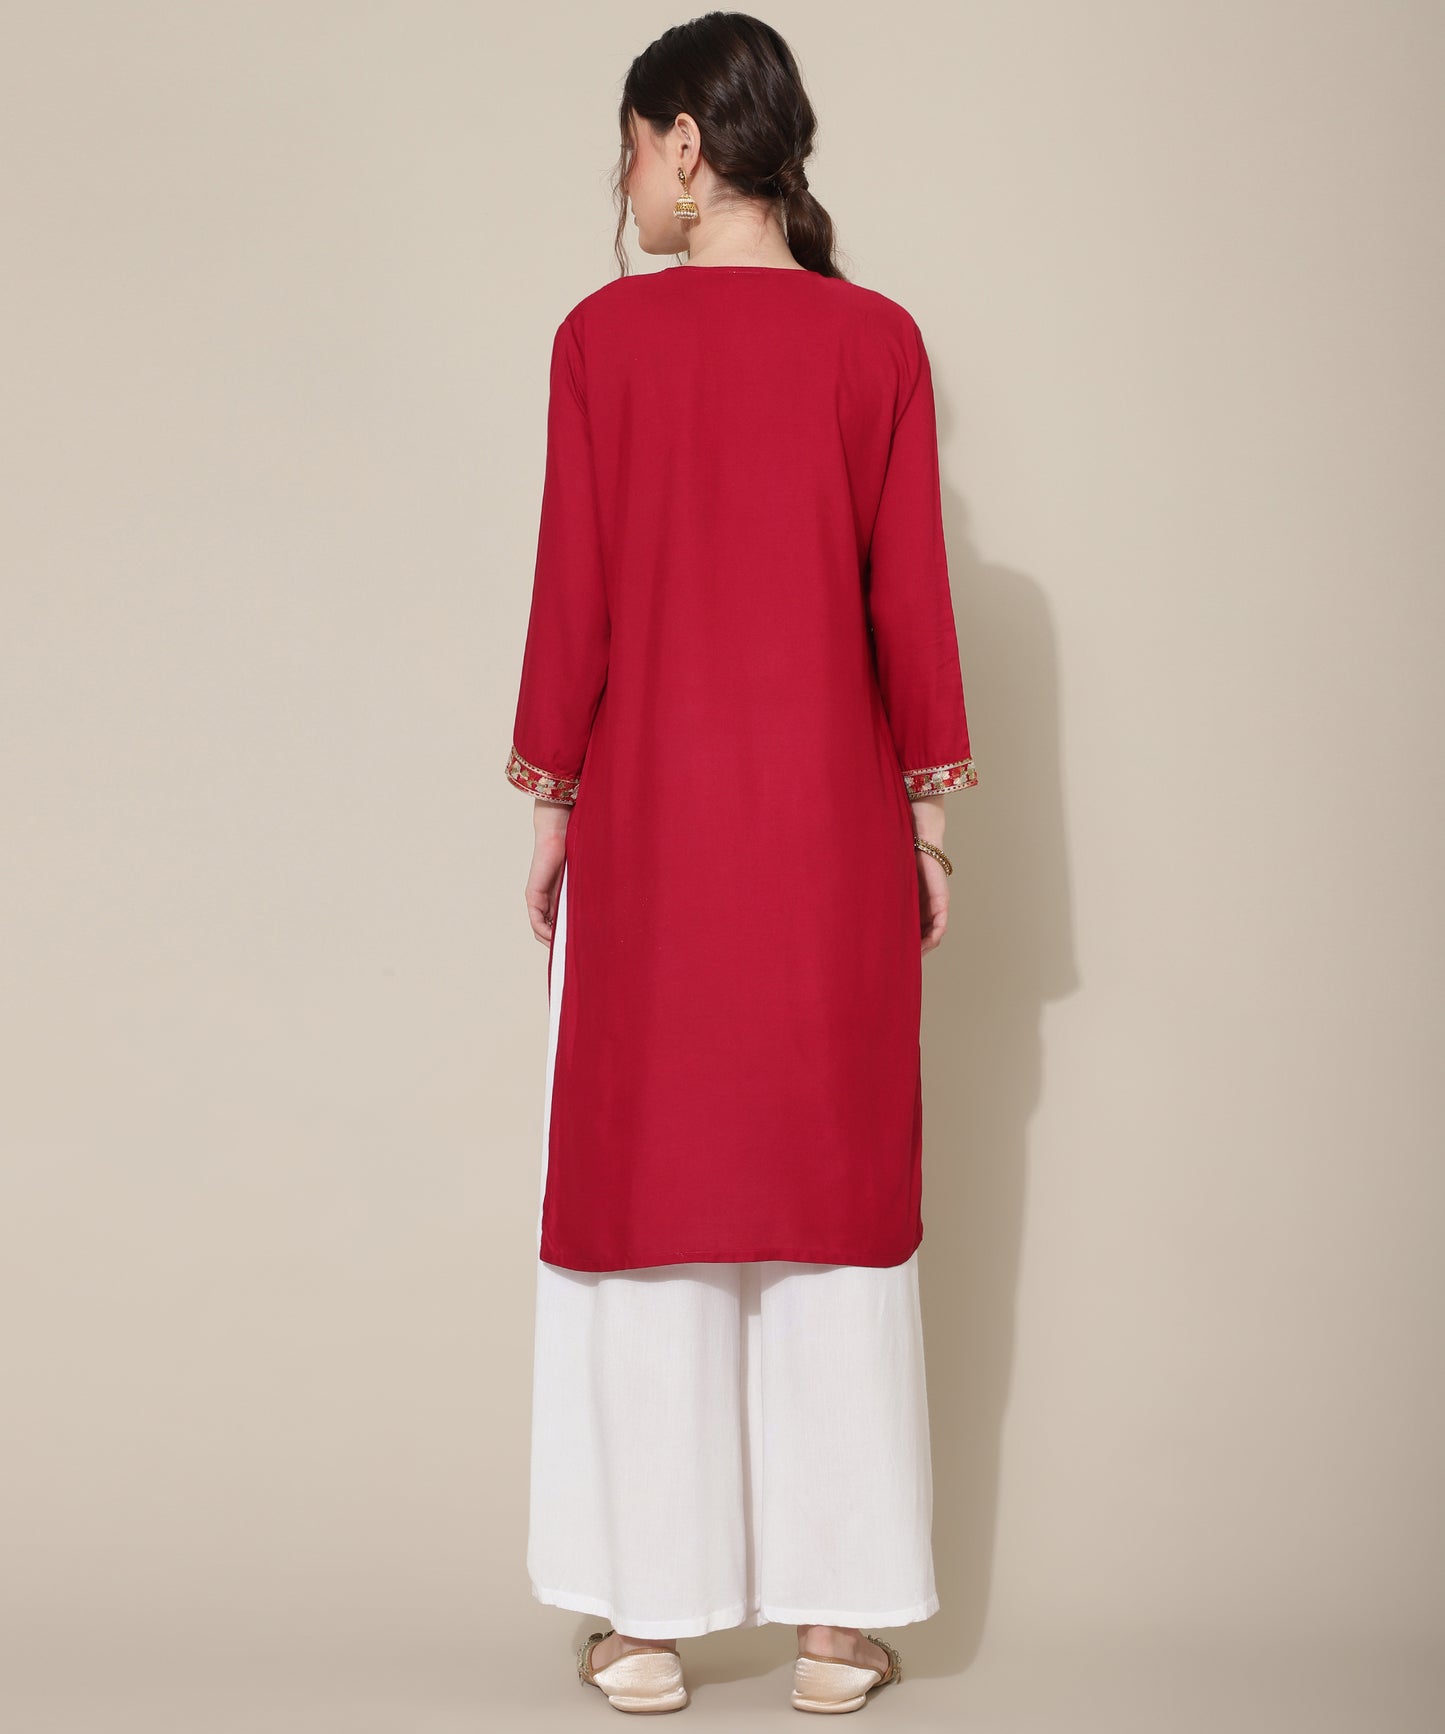 Stunning Embroidered Kurtas: Elevate Your Style with Exquisite Designs(Maroon)